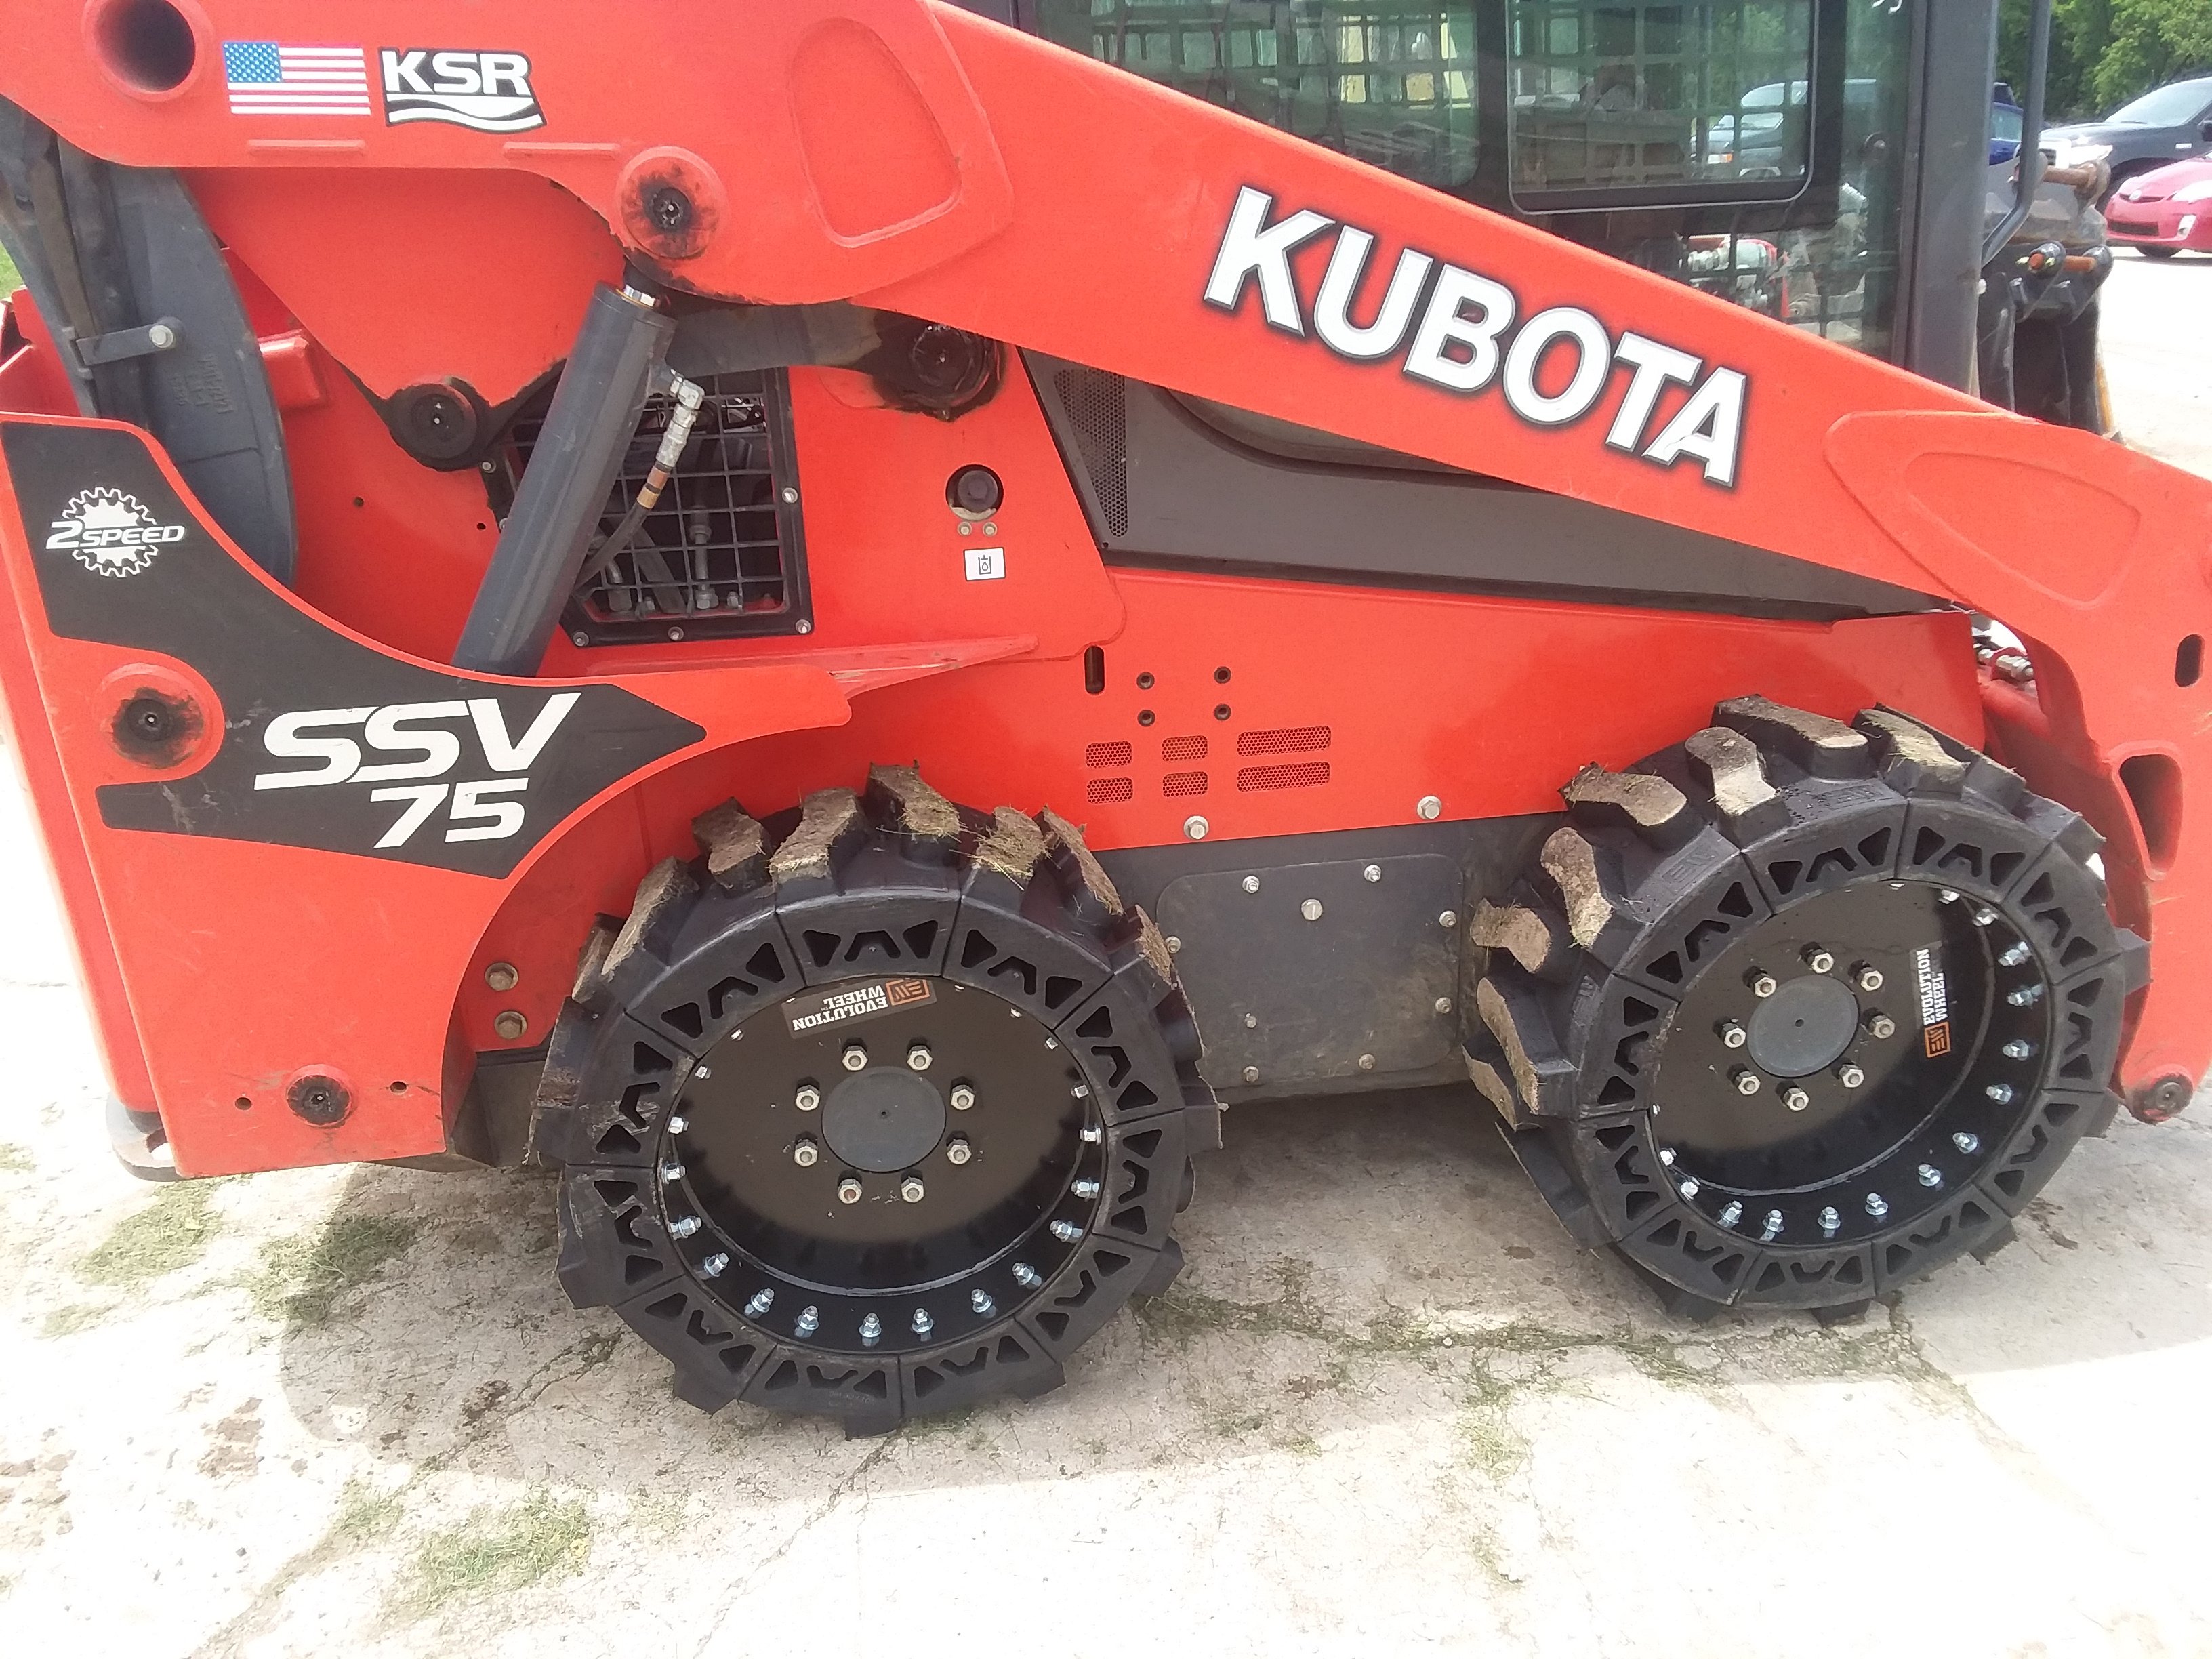 Bobcat solid tires are being used on a Kubota skid steer in this image.